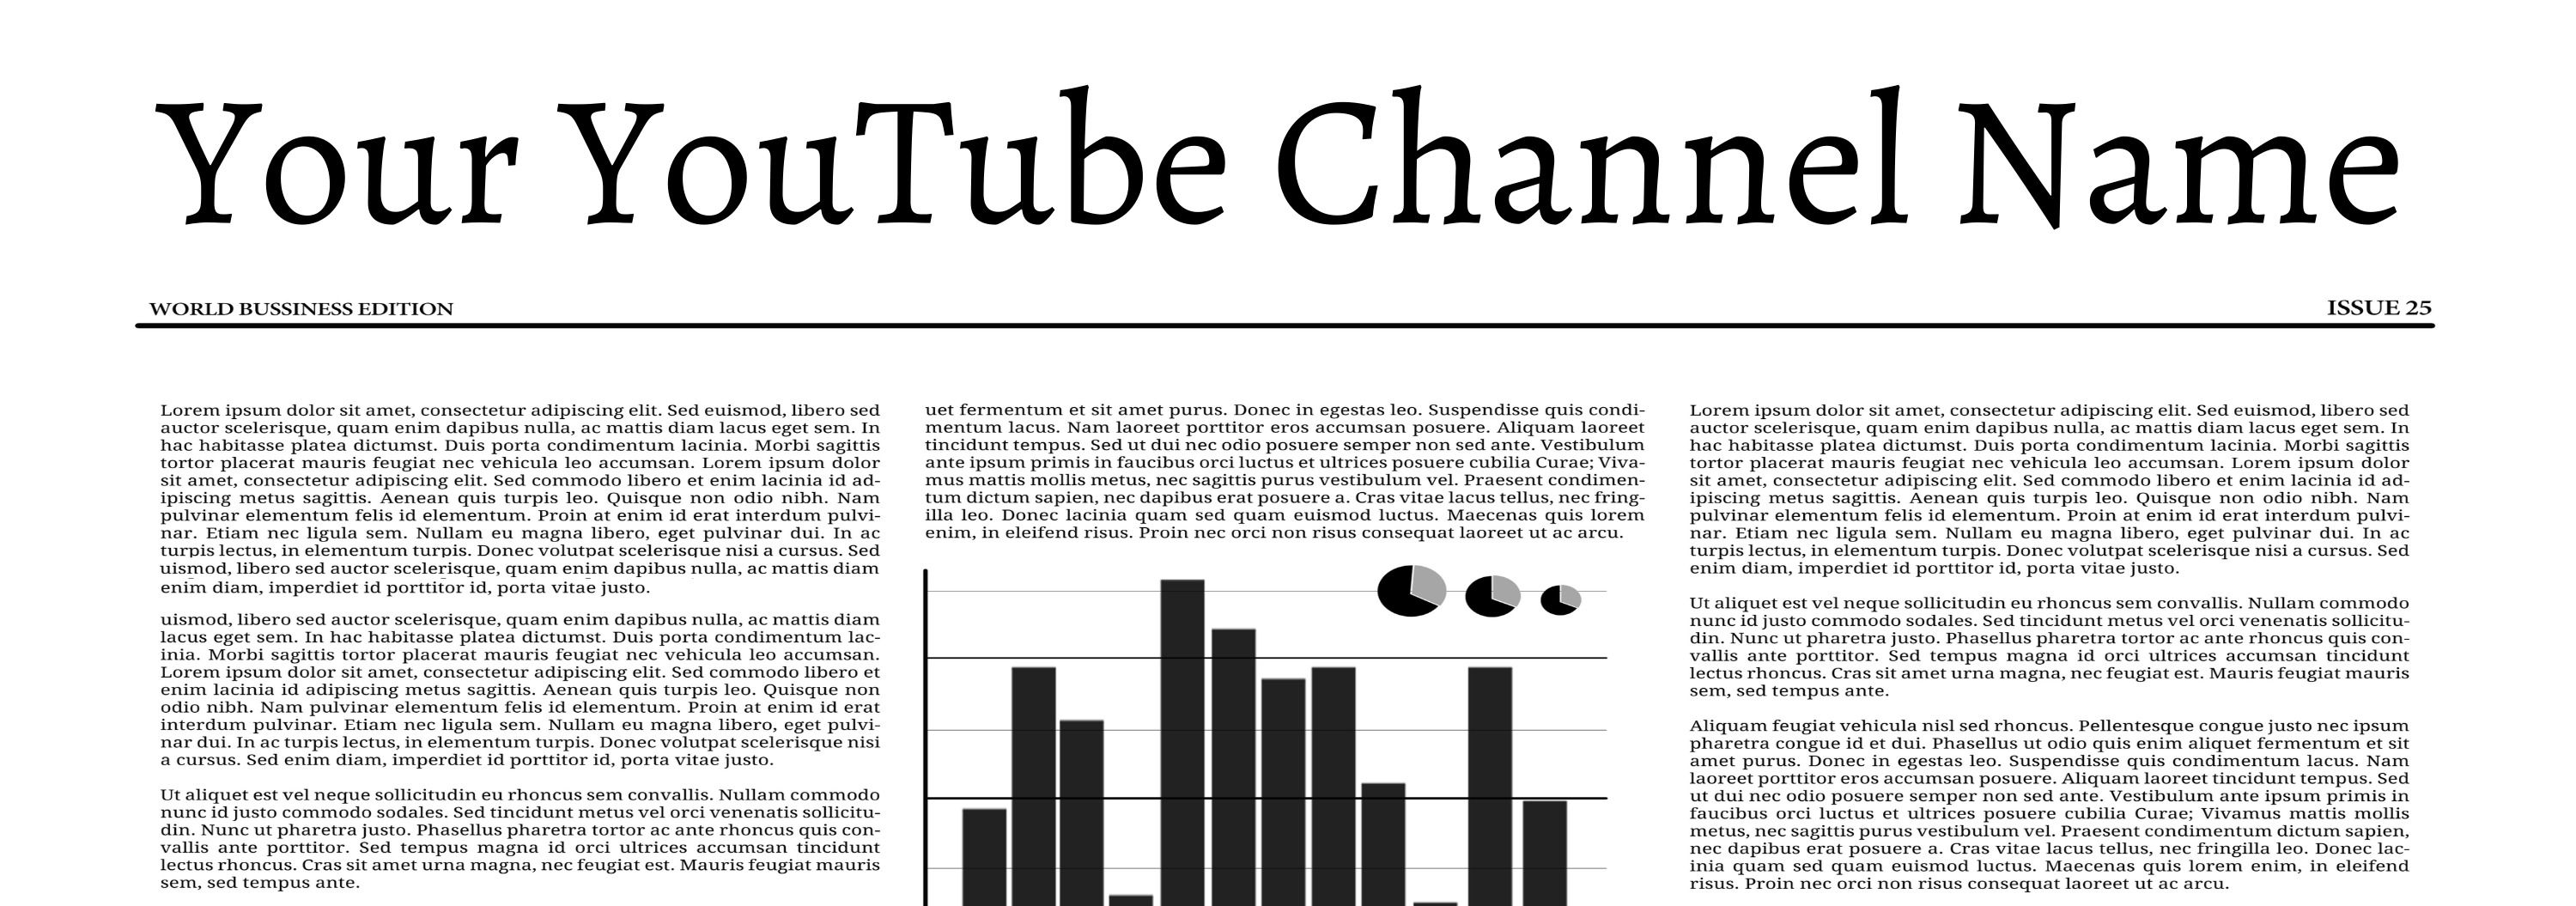 Newspaper with a bar graph and the headline "Your YouTube Channel Name" - How to start creating sponsored content on YouTube - Image